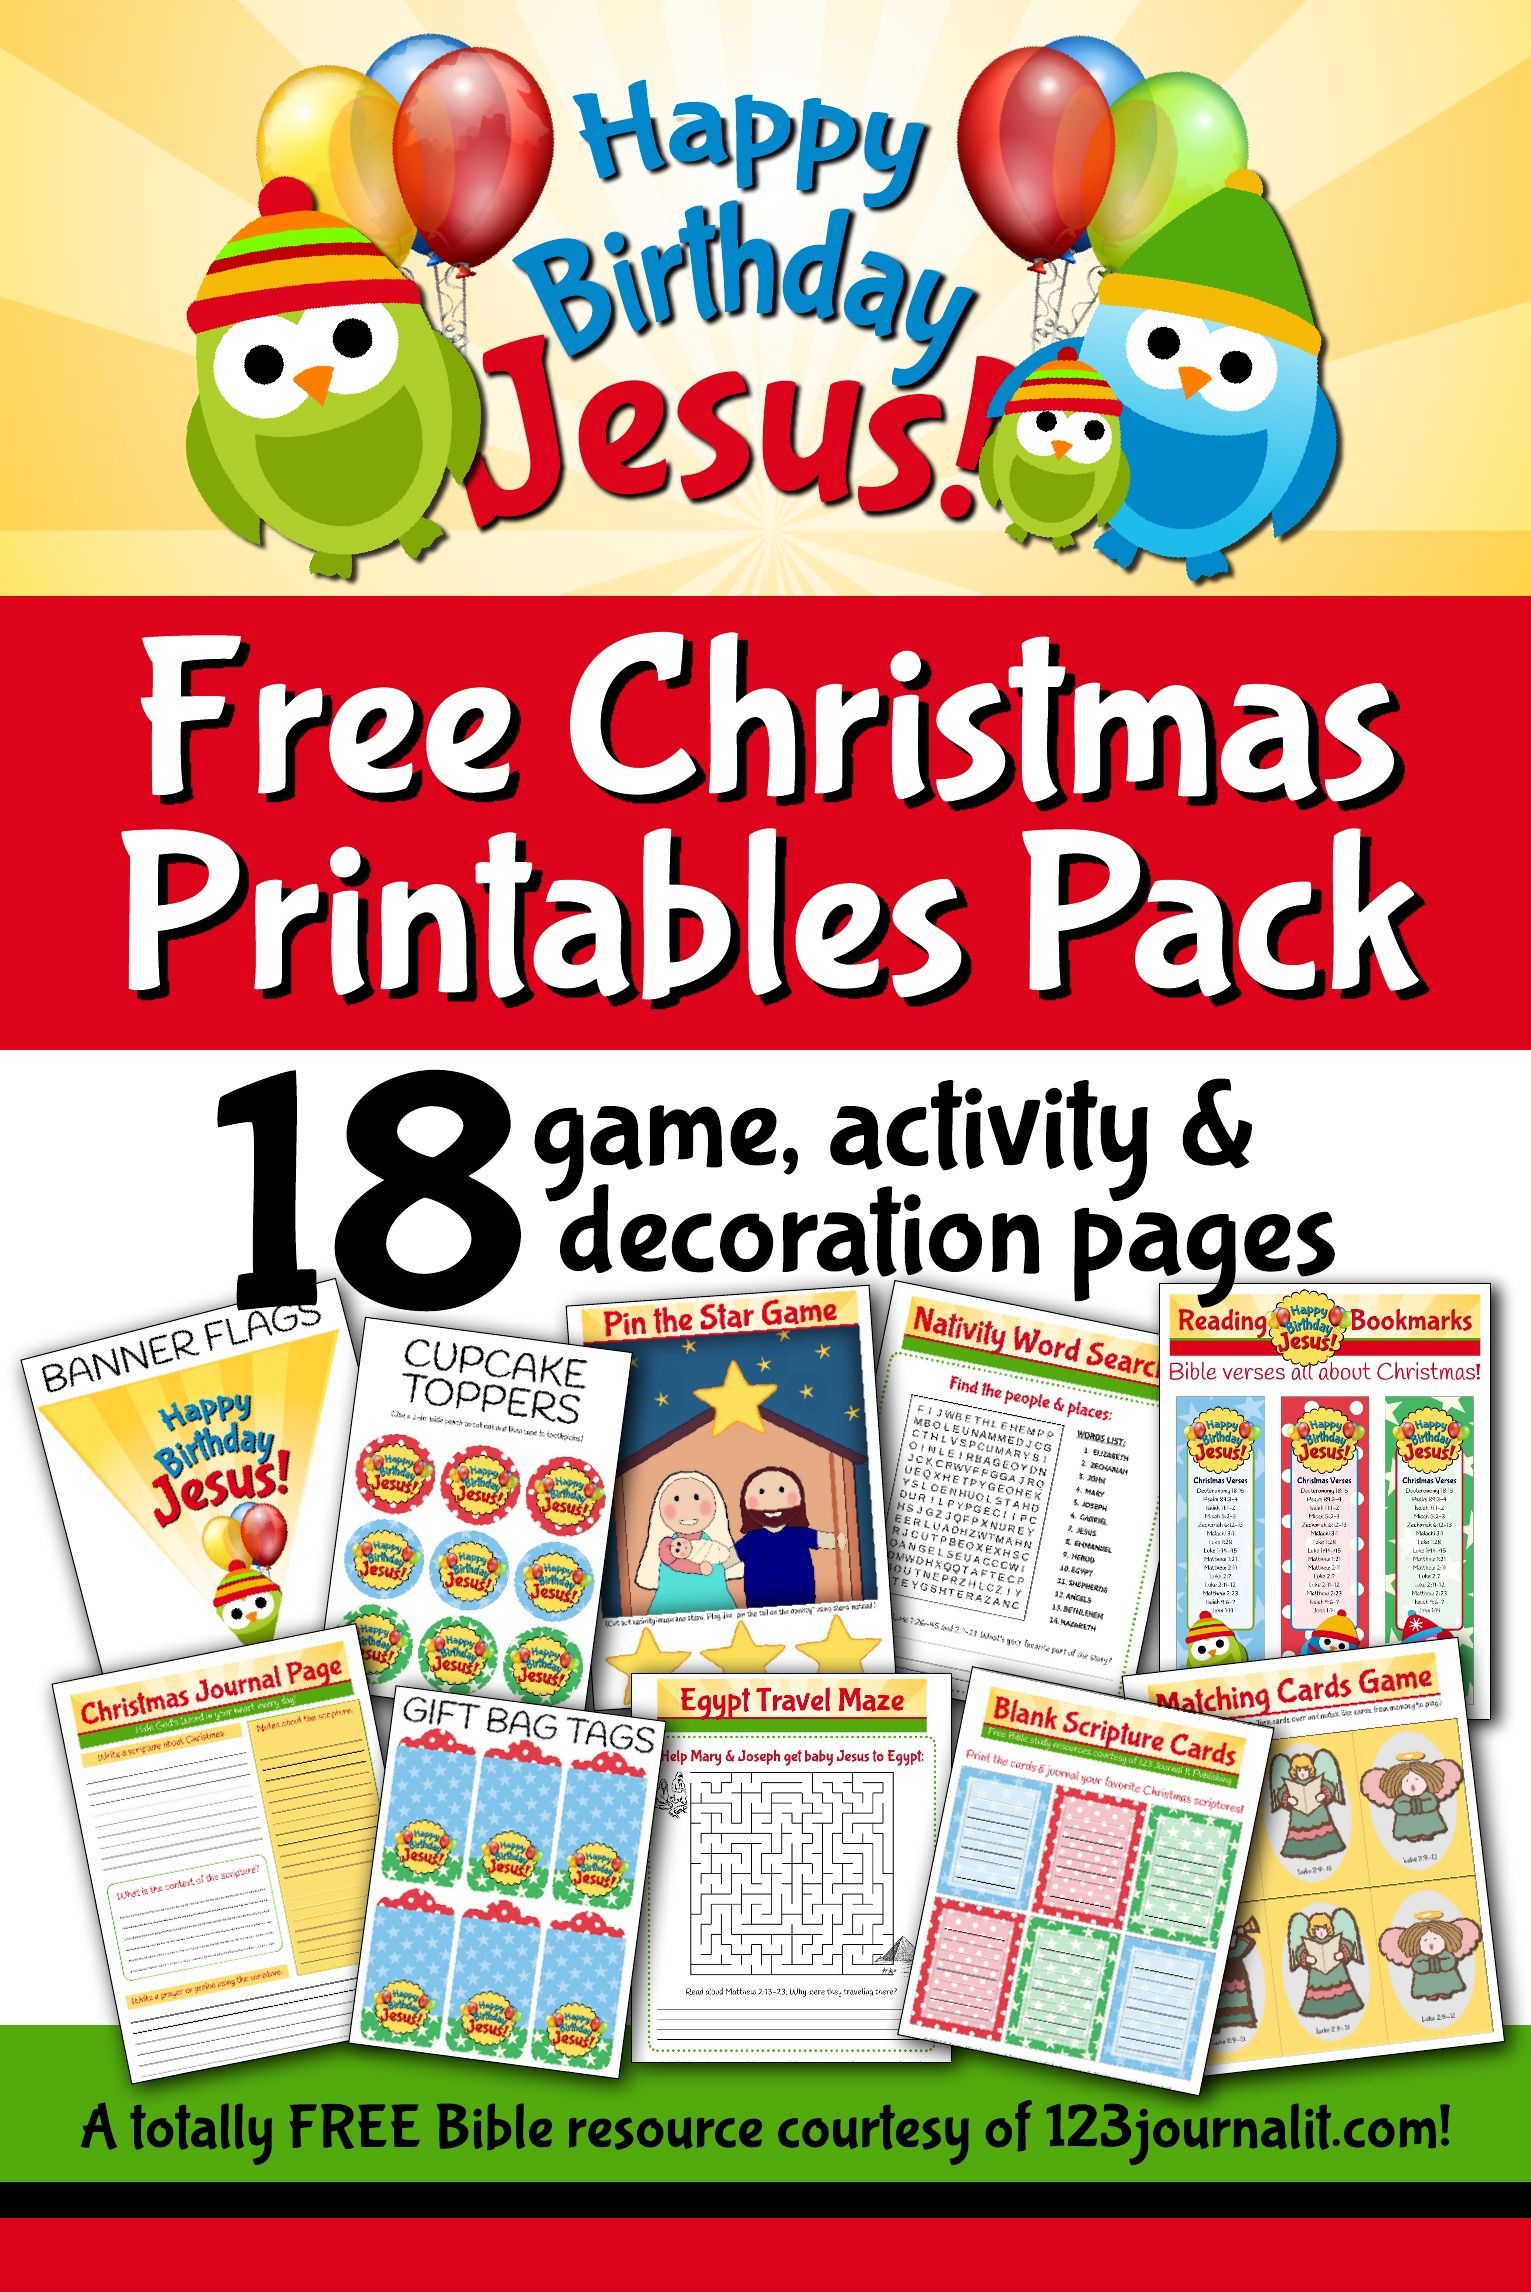 Free Happy Birthday Jesus Printable Party and Activity Pack for Kids